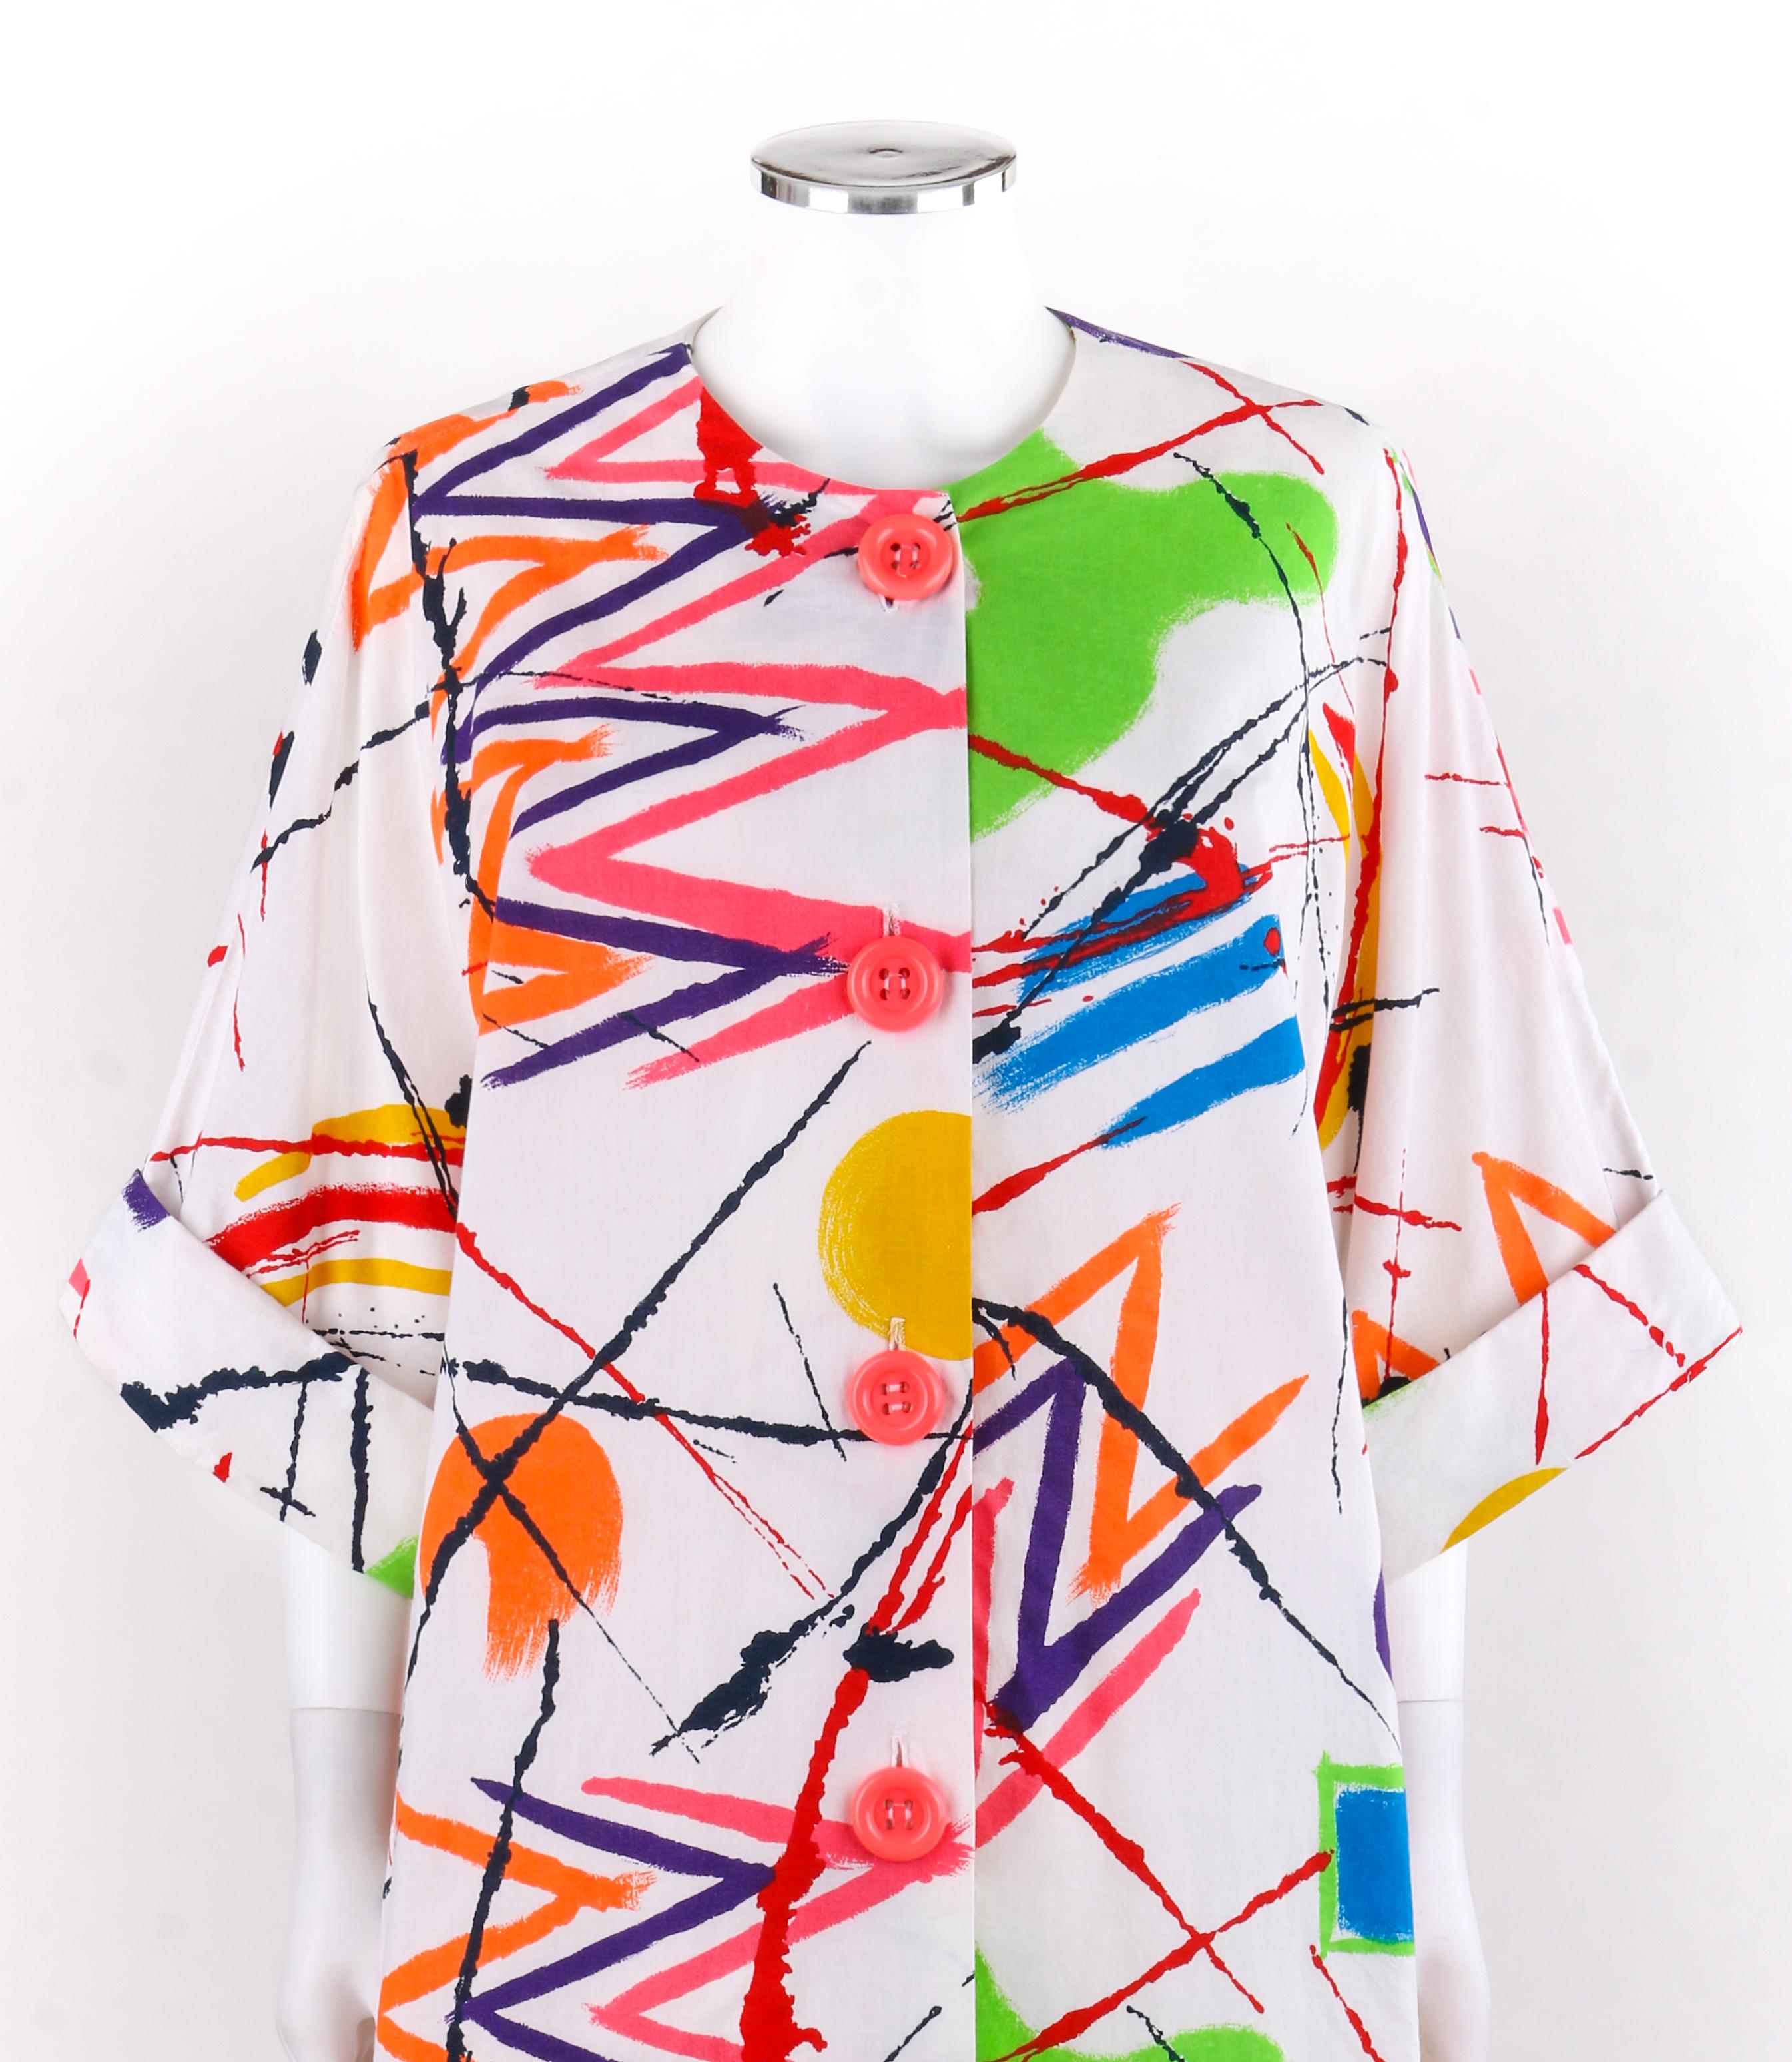 PIERRE CARDIN c.1980’s Multi-color Abstract Painterly Button Up Tunic Smock Dress 
 
Circa: 1980’s - 1990's
Label(s): Pierre Cardin 
Style: Tunic, smock, dress
Color(s): Shades of white, pink, orange, yellow, green, blue, purple and red. 
Lined: